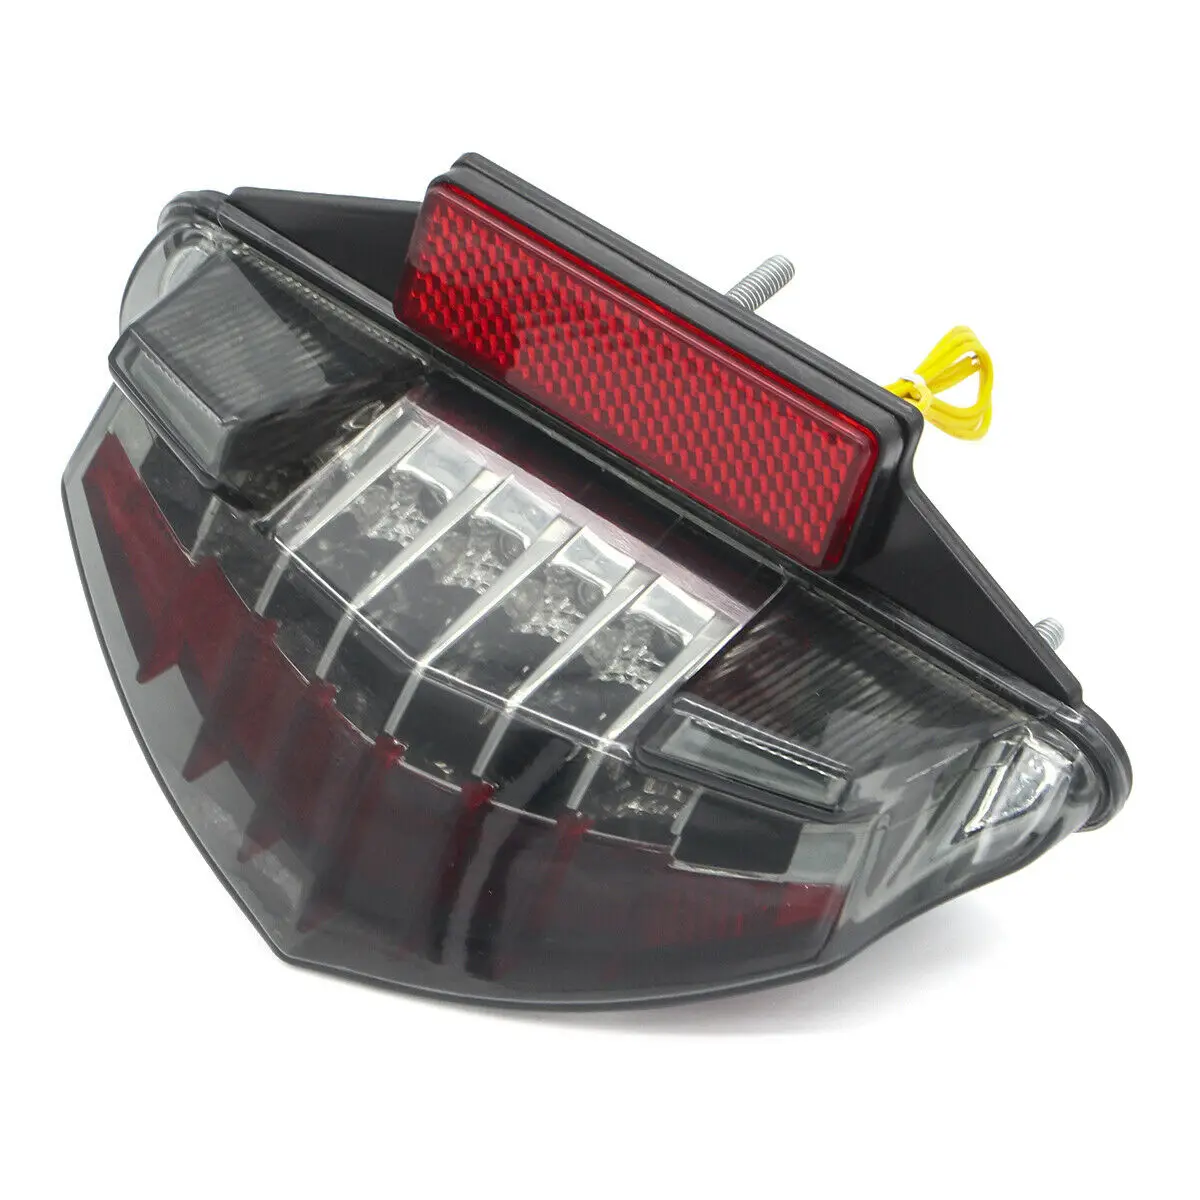 Racing Bike LED Turn Signal Lamp Taillight For BMW F800S 09-12 R1200GS Adv 05-14